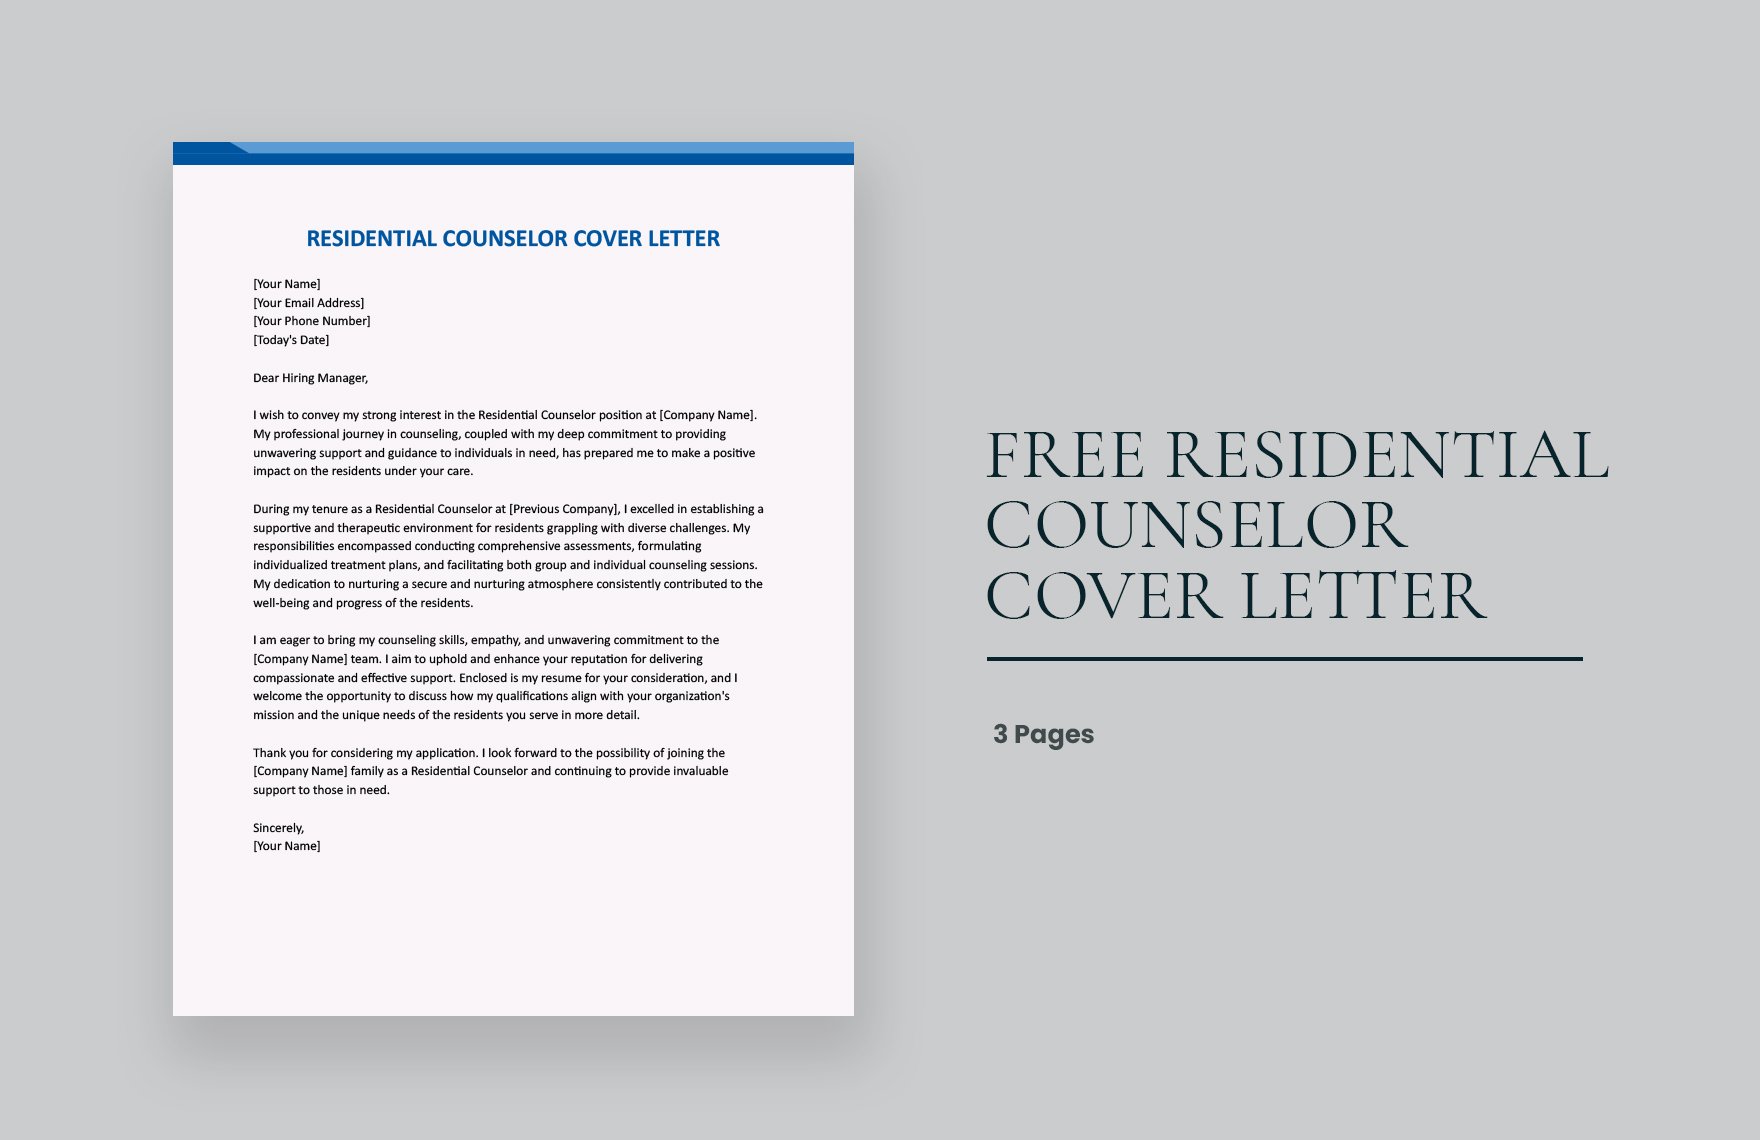 Residential Counselor Cover Letter in Word, Google Docs